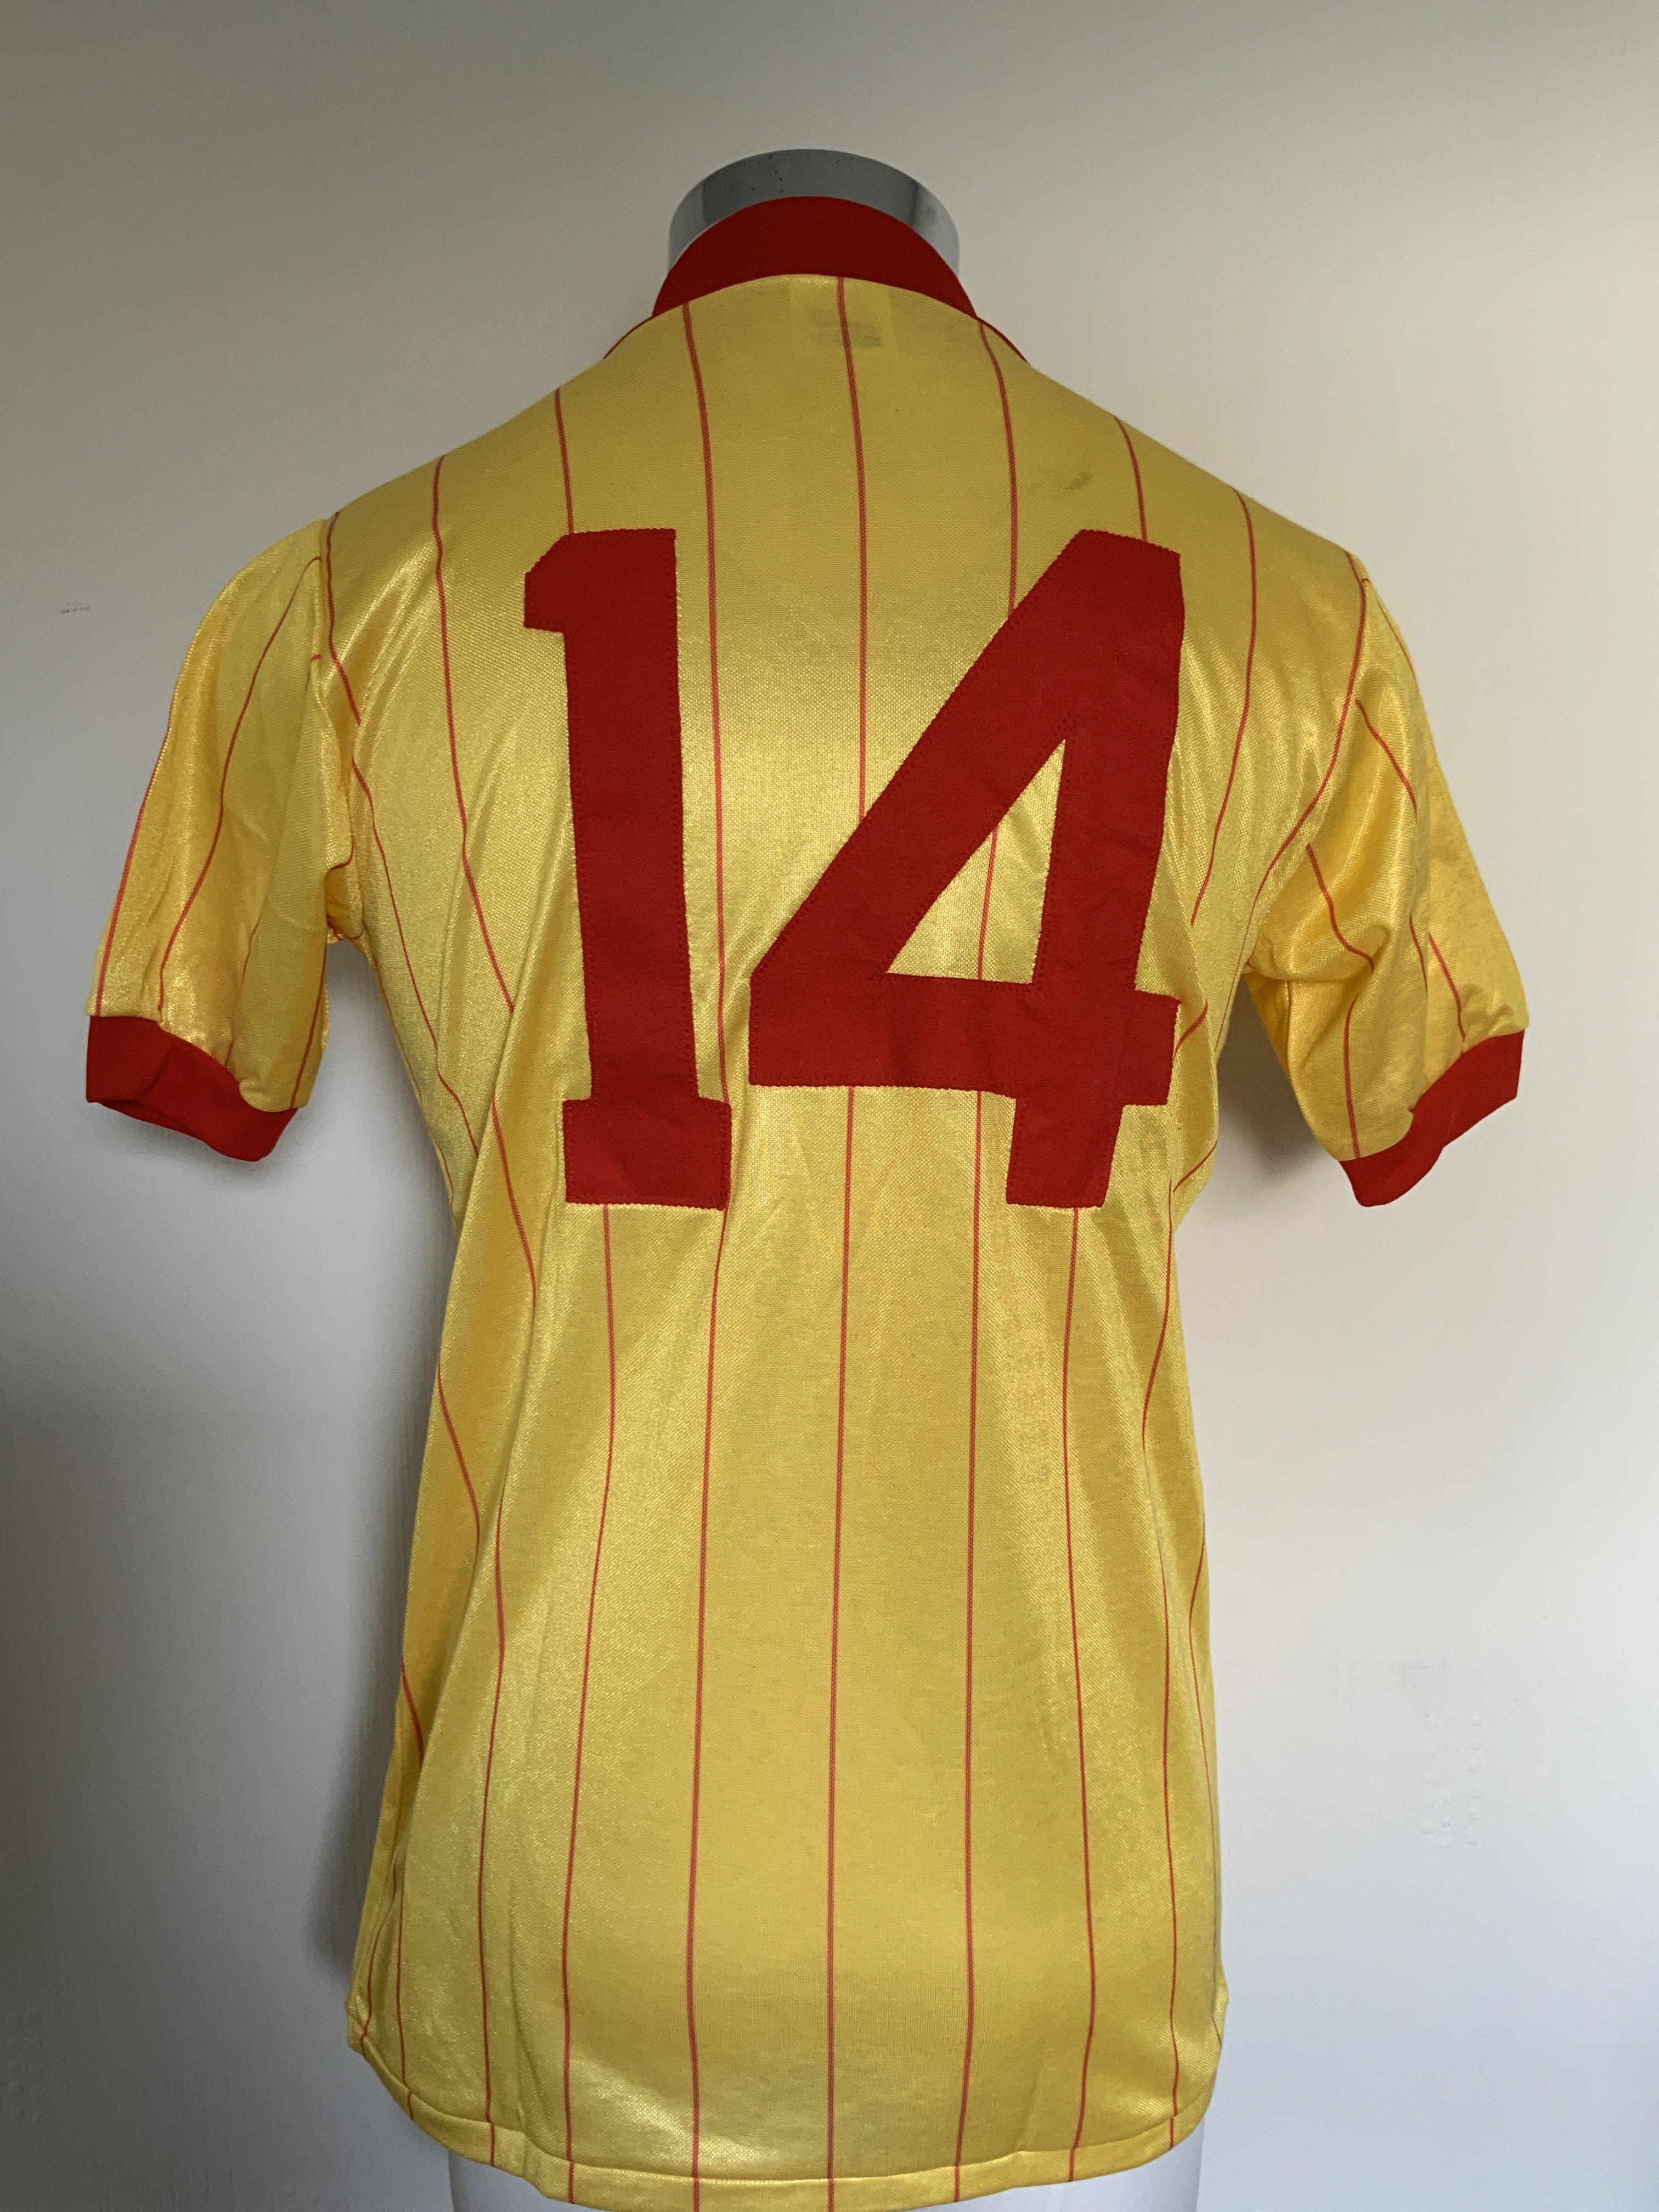 Liverpool 81/82 Match Issued European Football Shirt: Short sleeve yellow shirt with red pin stripes - Image 2 of 4